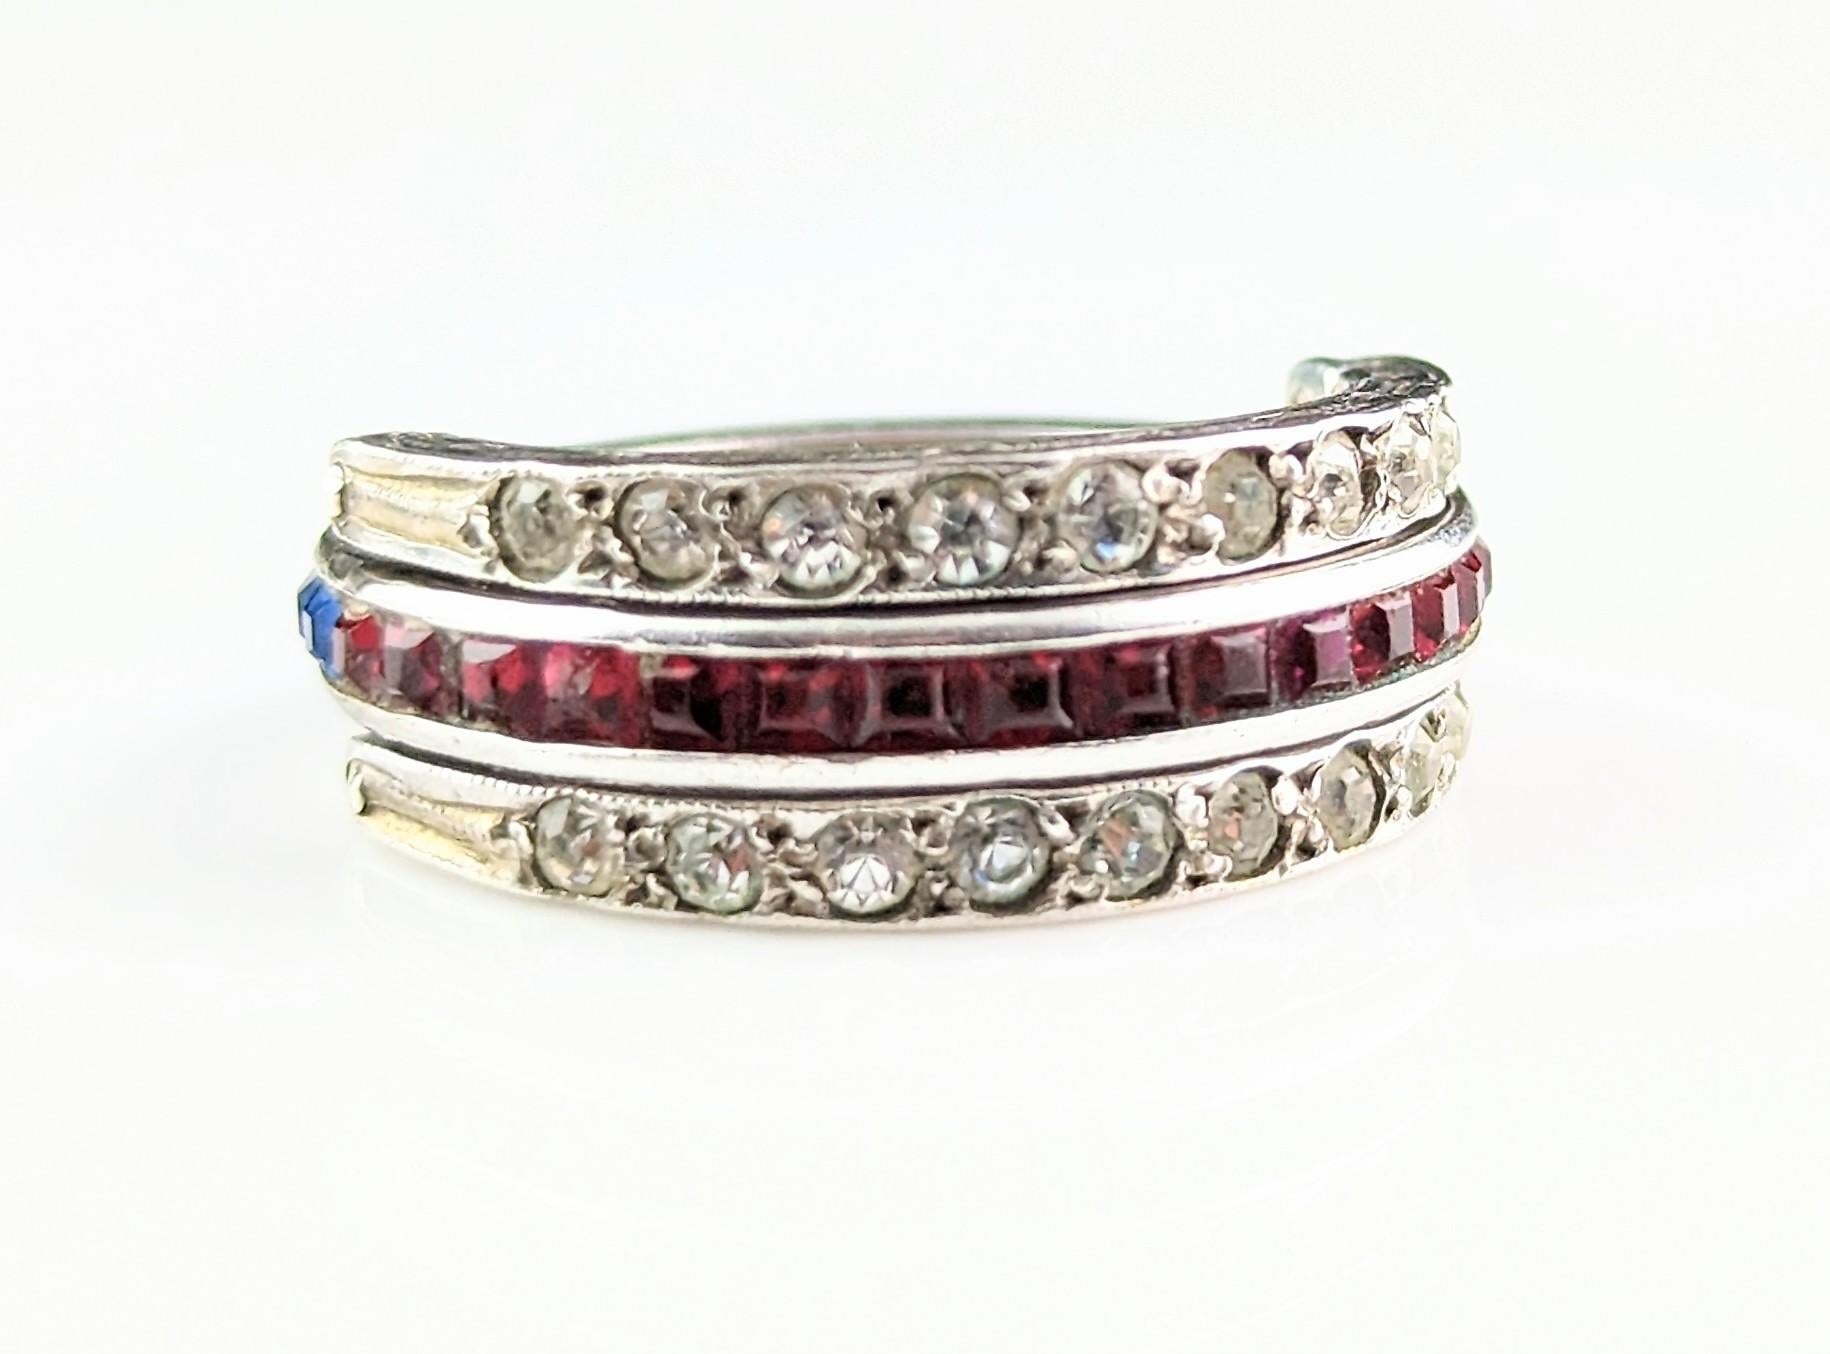 Vintage Art Deco Paste Eternity Ring, Day to Night, Flippable For Sale 9